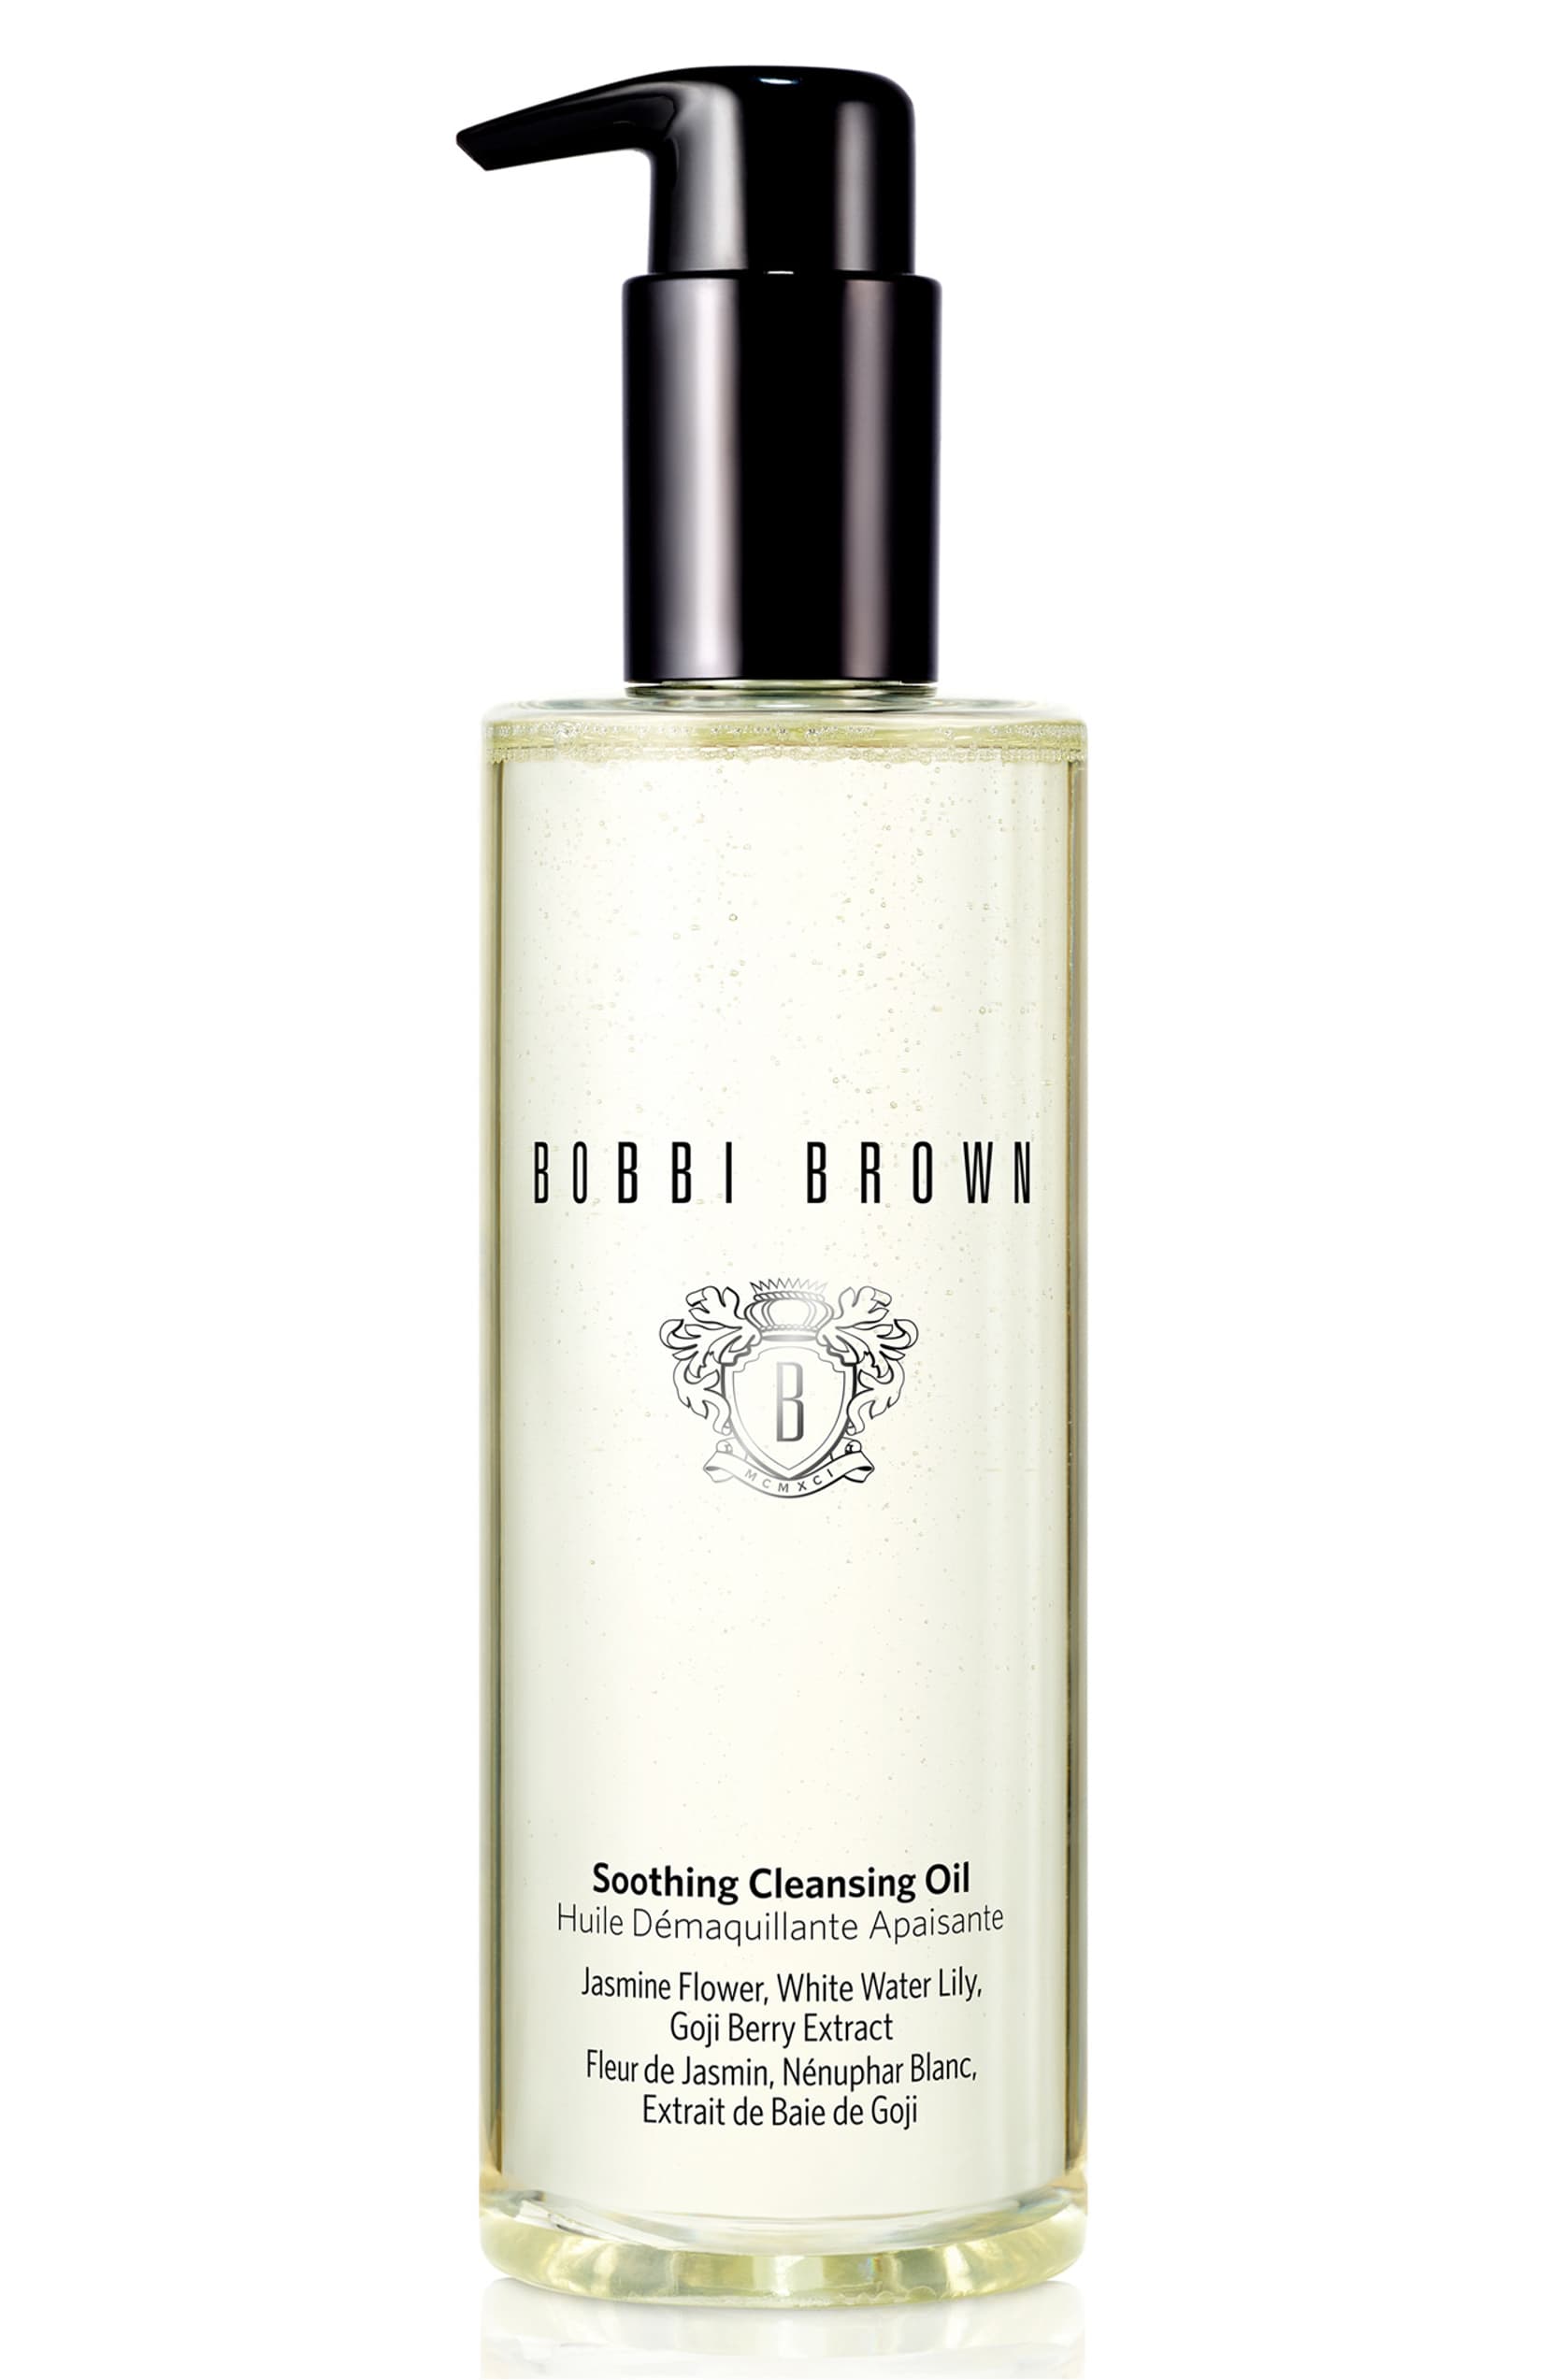 Bobbi Brown Soothing Cleansing Oil Jumbo Size 13.5 oz / 400 ml - Limited Edition - - eCosmeticWorld